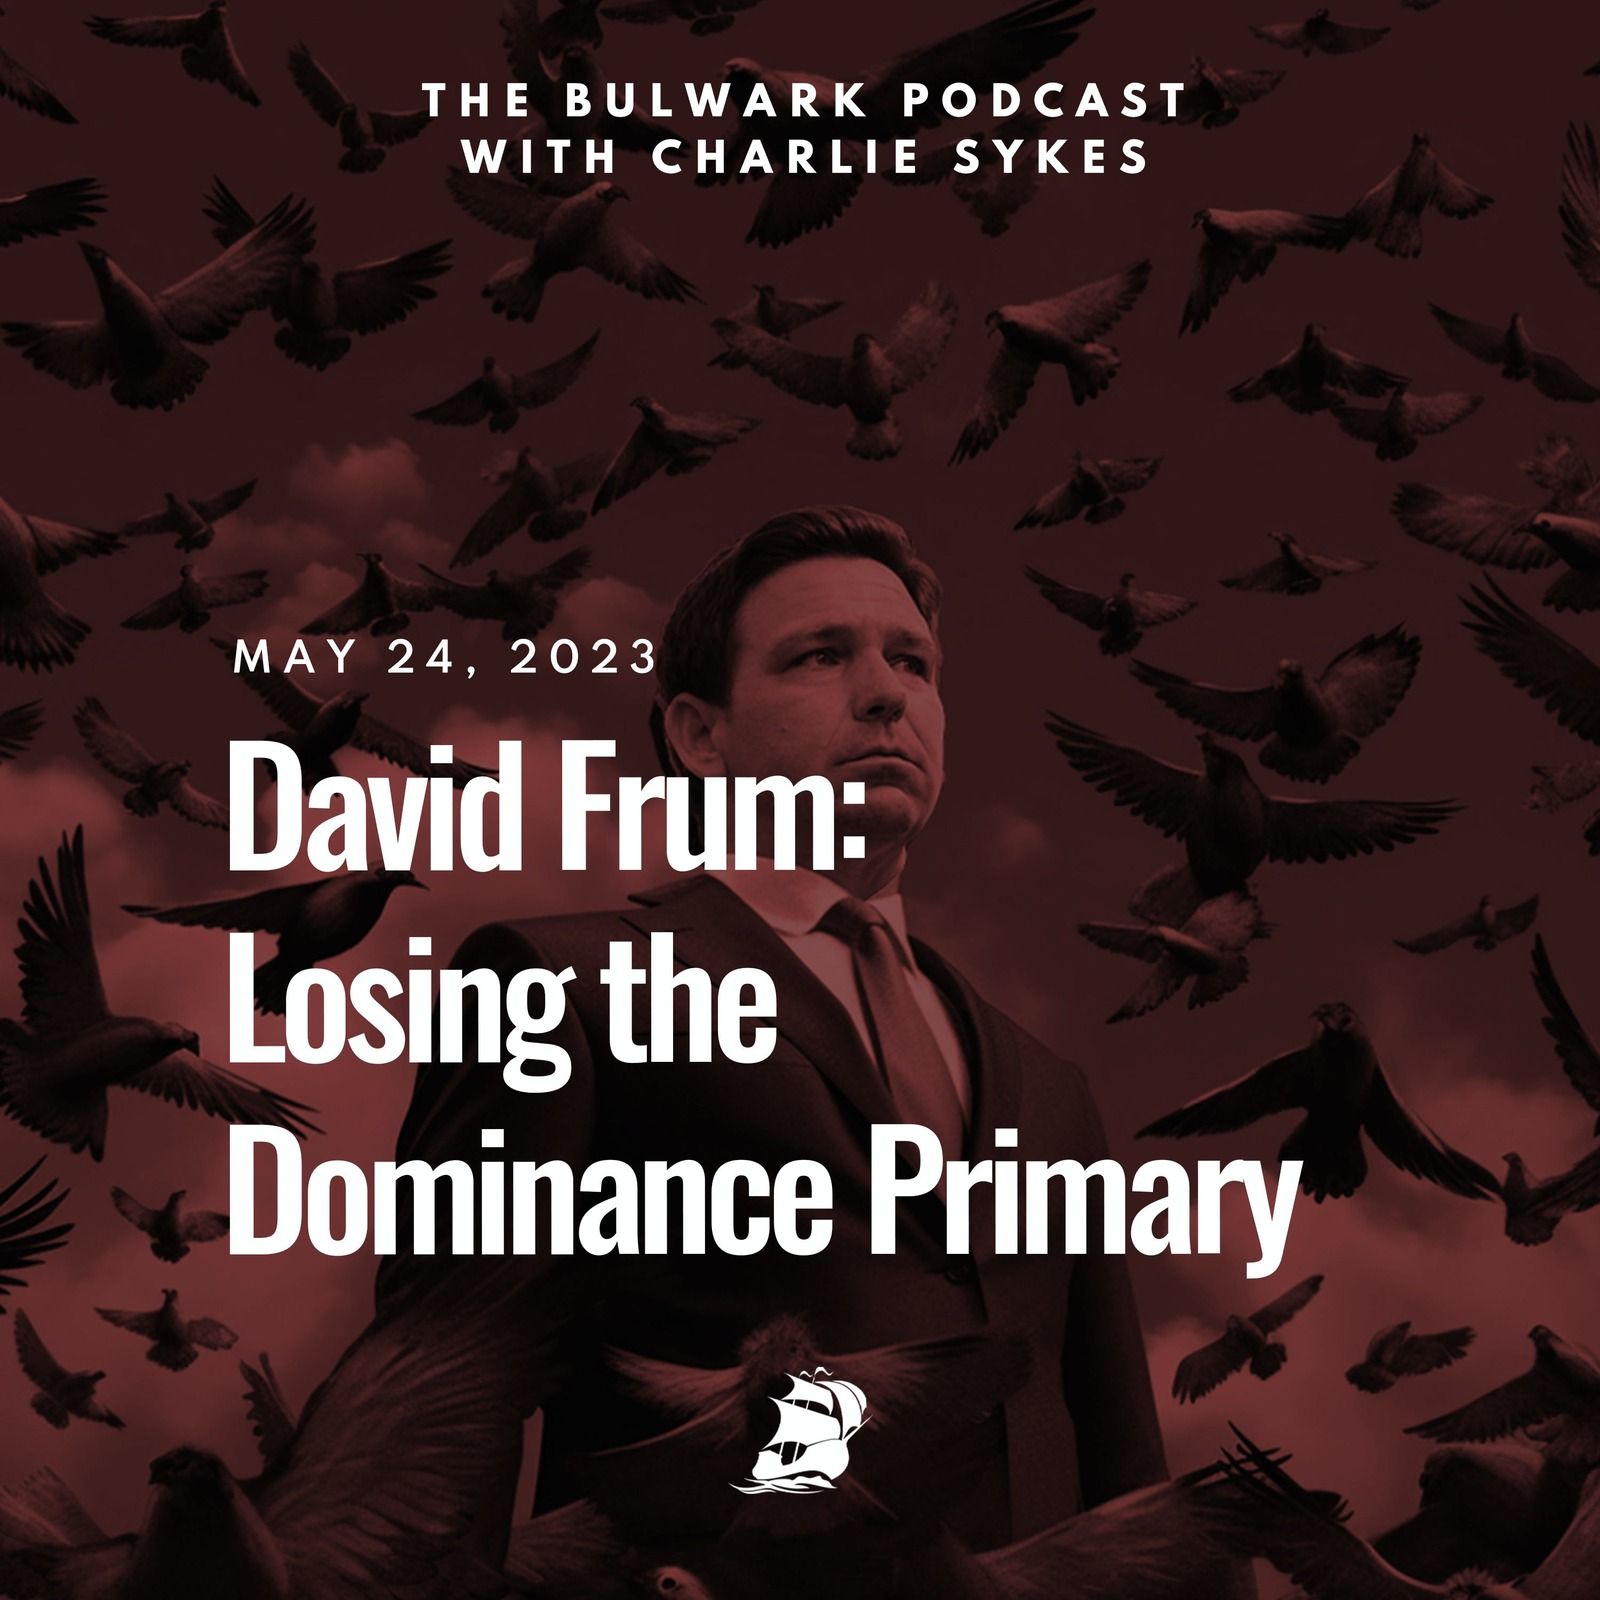 David Frum: Losing the Dominance Primary by The Bulwark Podcast